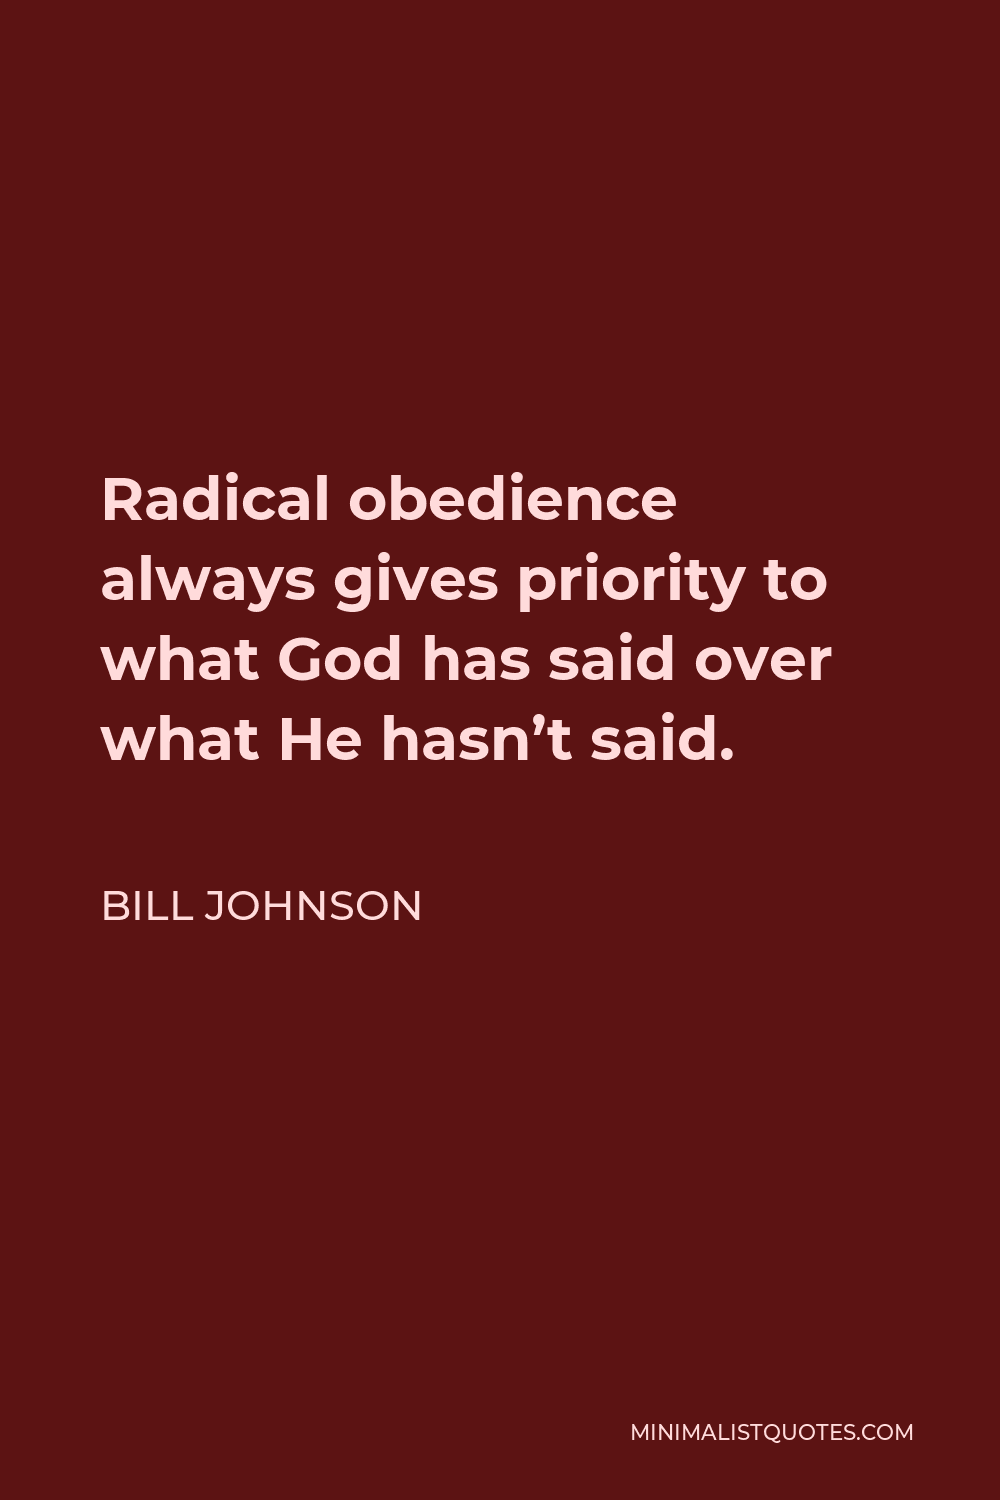 Bill Johnson Quote - Radical obedience always gives priority to what God has said over what He hasn’t said.